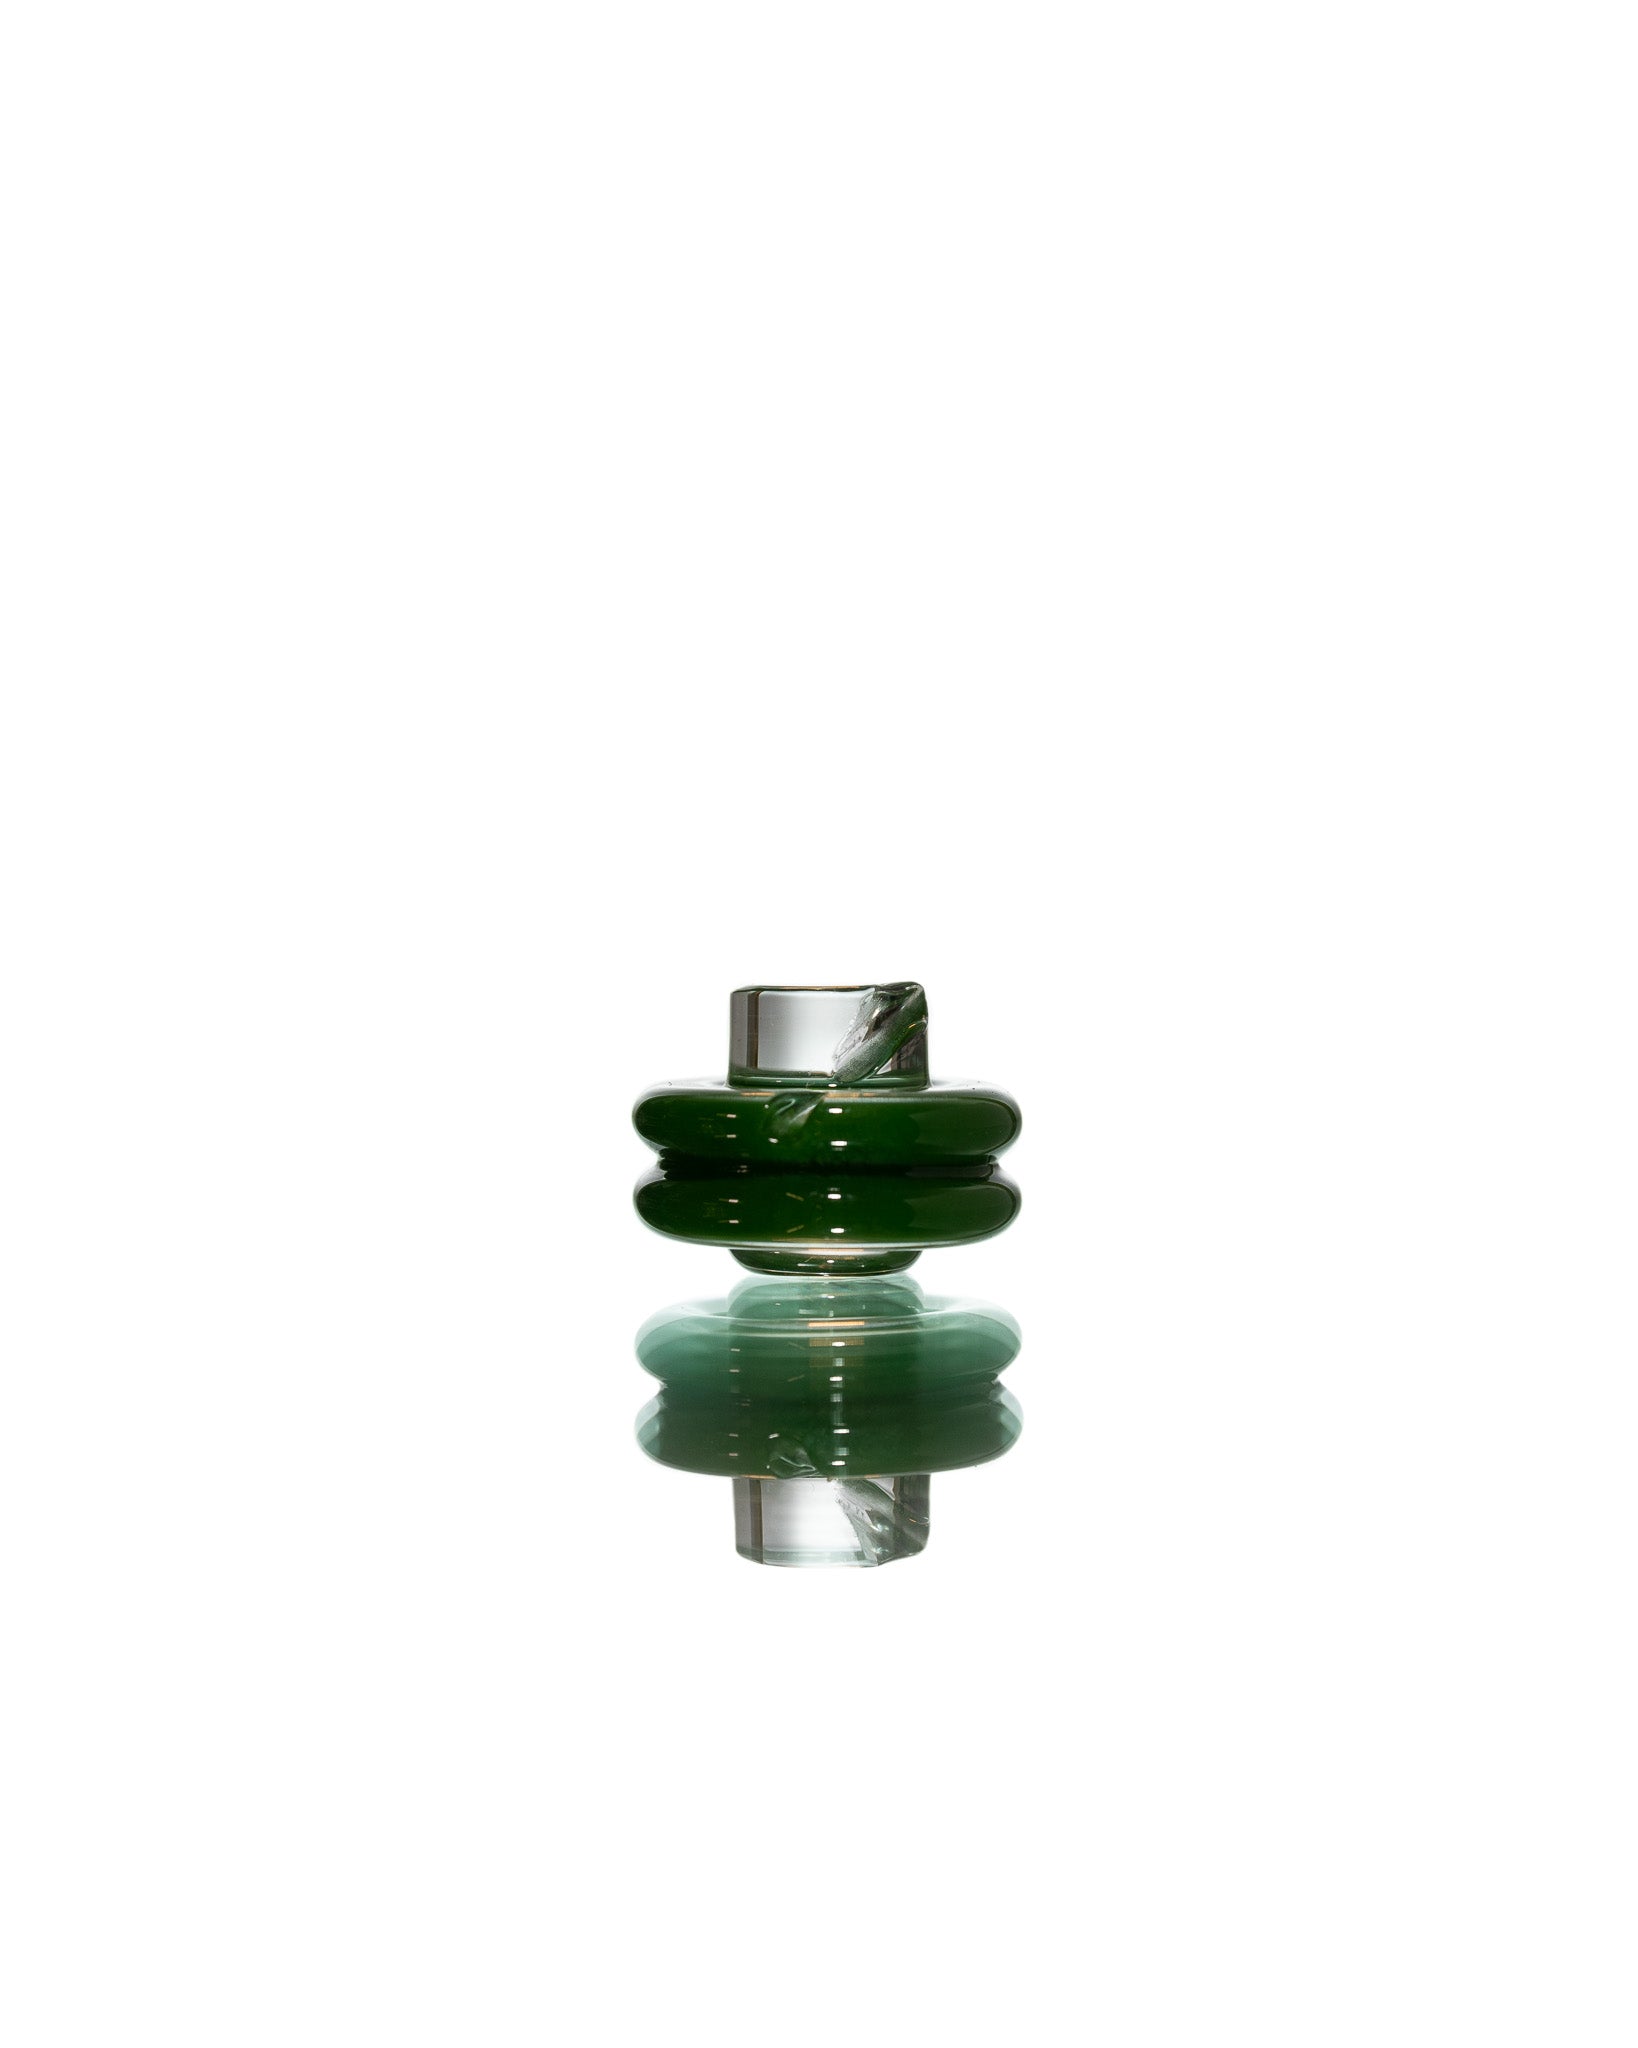 One Trick Pony - "Ever Green" Flat Top "Rockulus" Spinner Cap